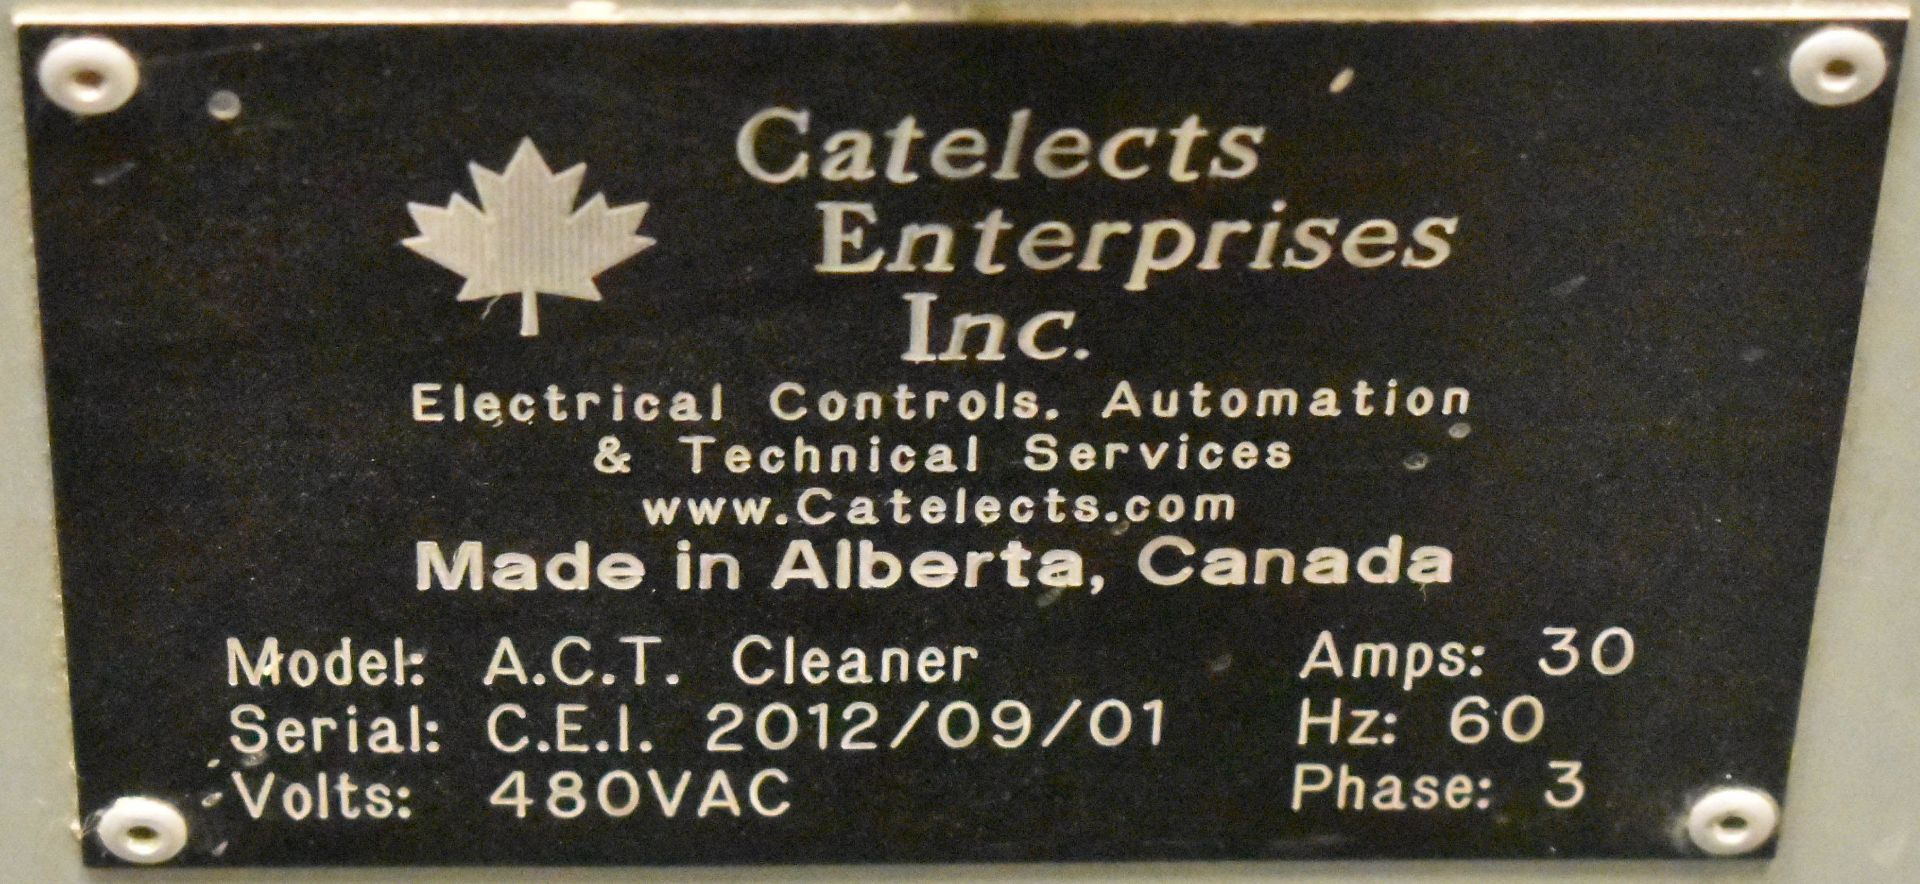 CATELECTS (2012) MODEL A.C.T. CLEANER PIPE DEBURRING MACHINE WITH APPROX. 40' TRAVEL, 7.5 HP SPINDLE - Image 10 of 10